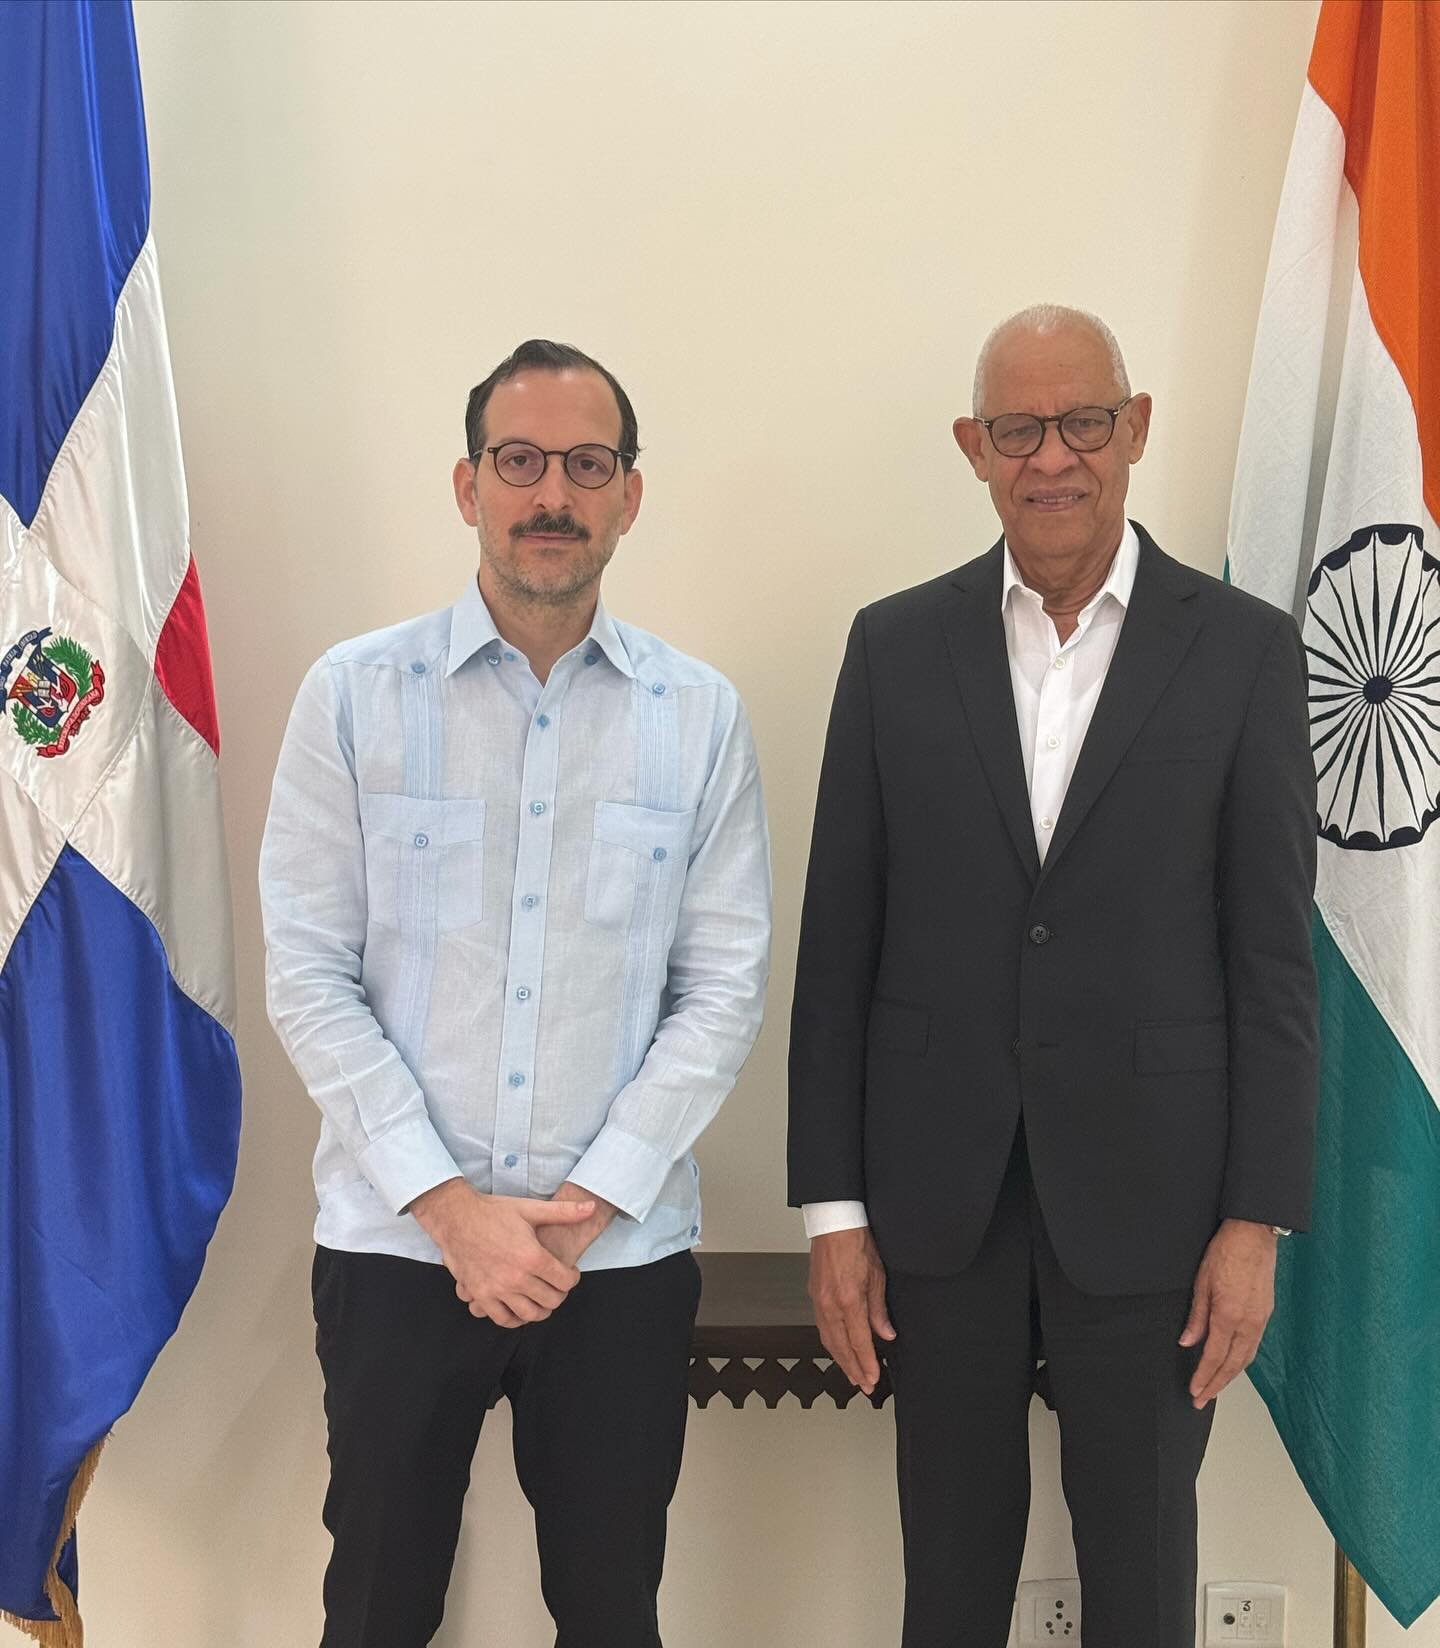 Ambassador David Puig welcomed in Delhi on Monday 22nd April Vice Minister of the @presidenciard for monitoring and government coordination who will attend the CDRI Governing Council meeting, ICDRI 2024 international conference and engage with variou